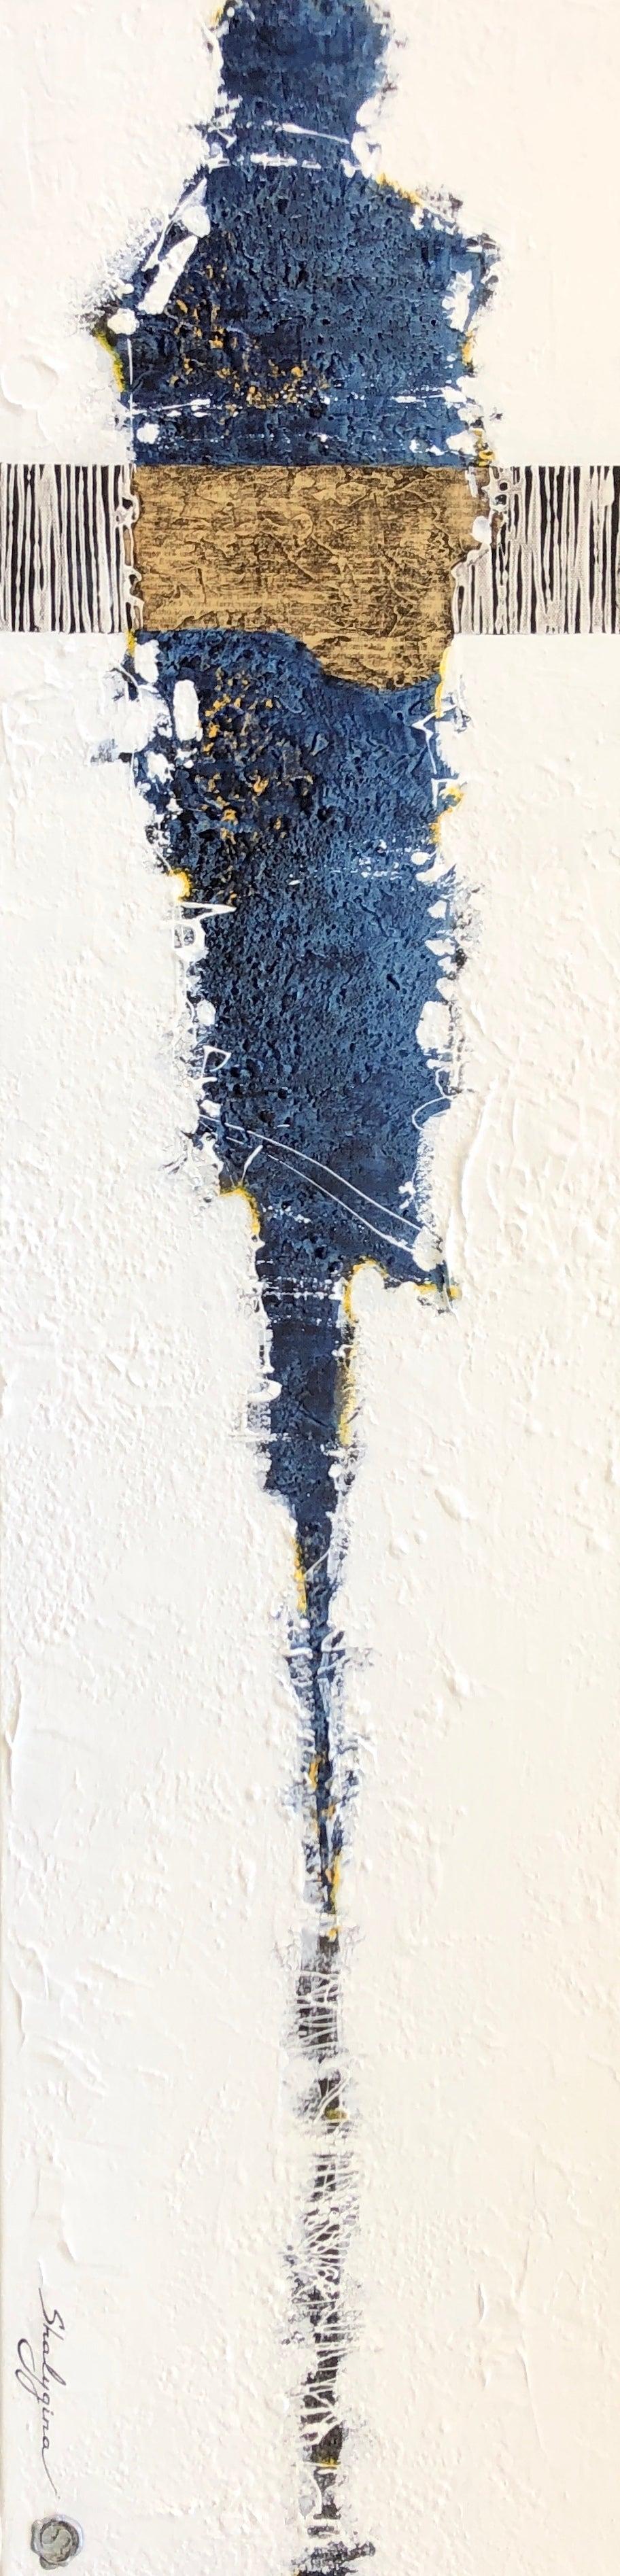 White Blue Tan Abstract Figure Textured Contemporary Mixed Media Painting 48x12